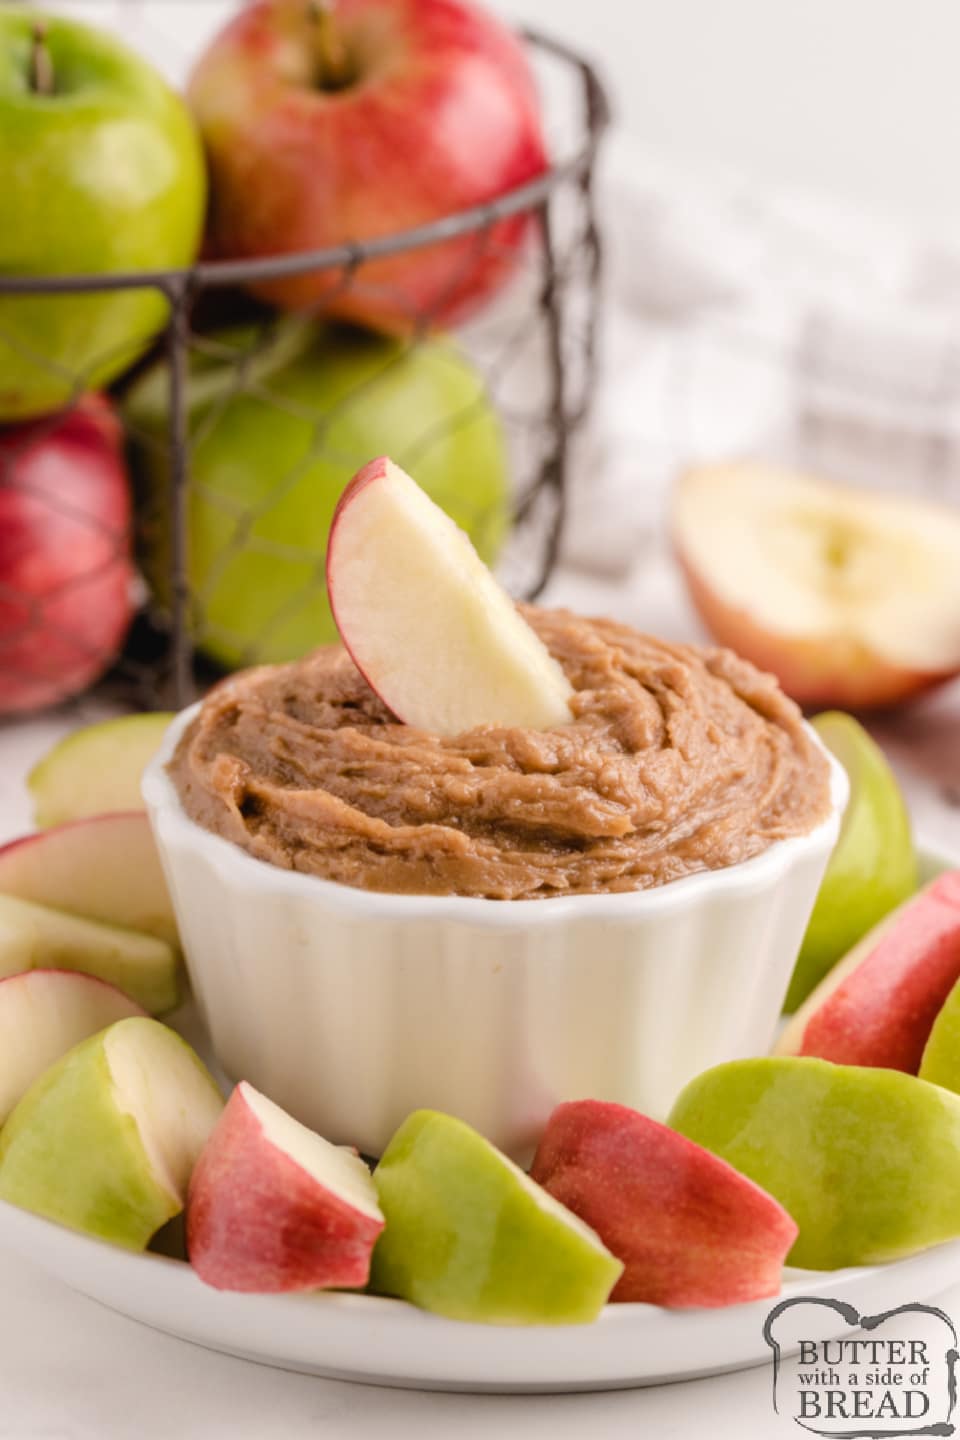 Peanut Butter Apple Dip is made with 5 simple ingredients and is perfect for a snack. Made with cream cheese, peanut butter, and brown sugar in less than 3 minutes!